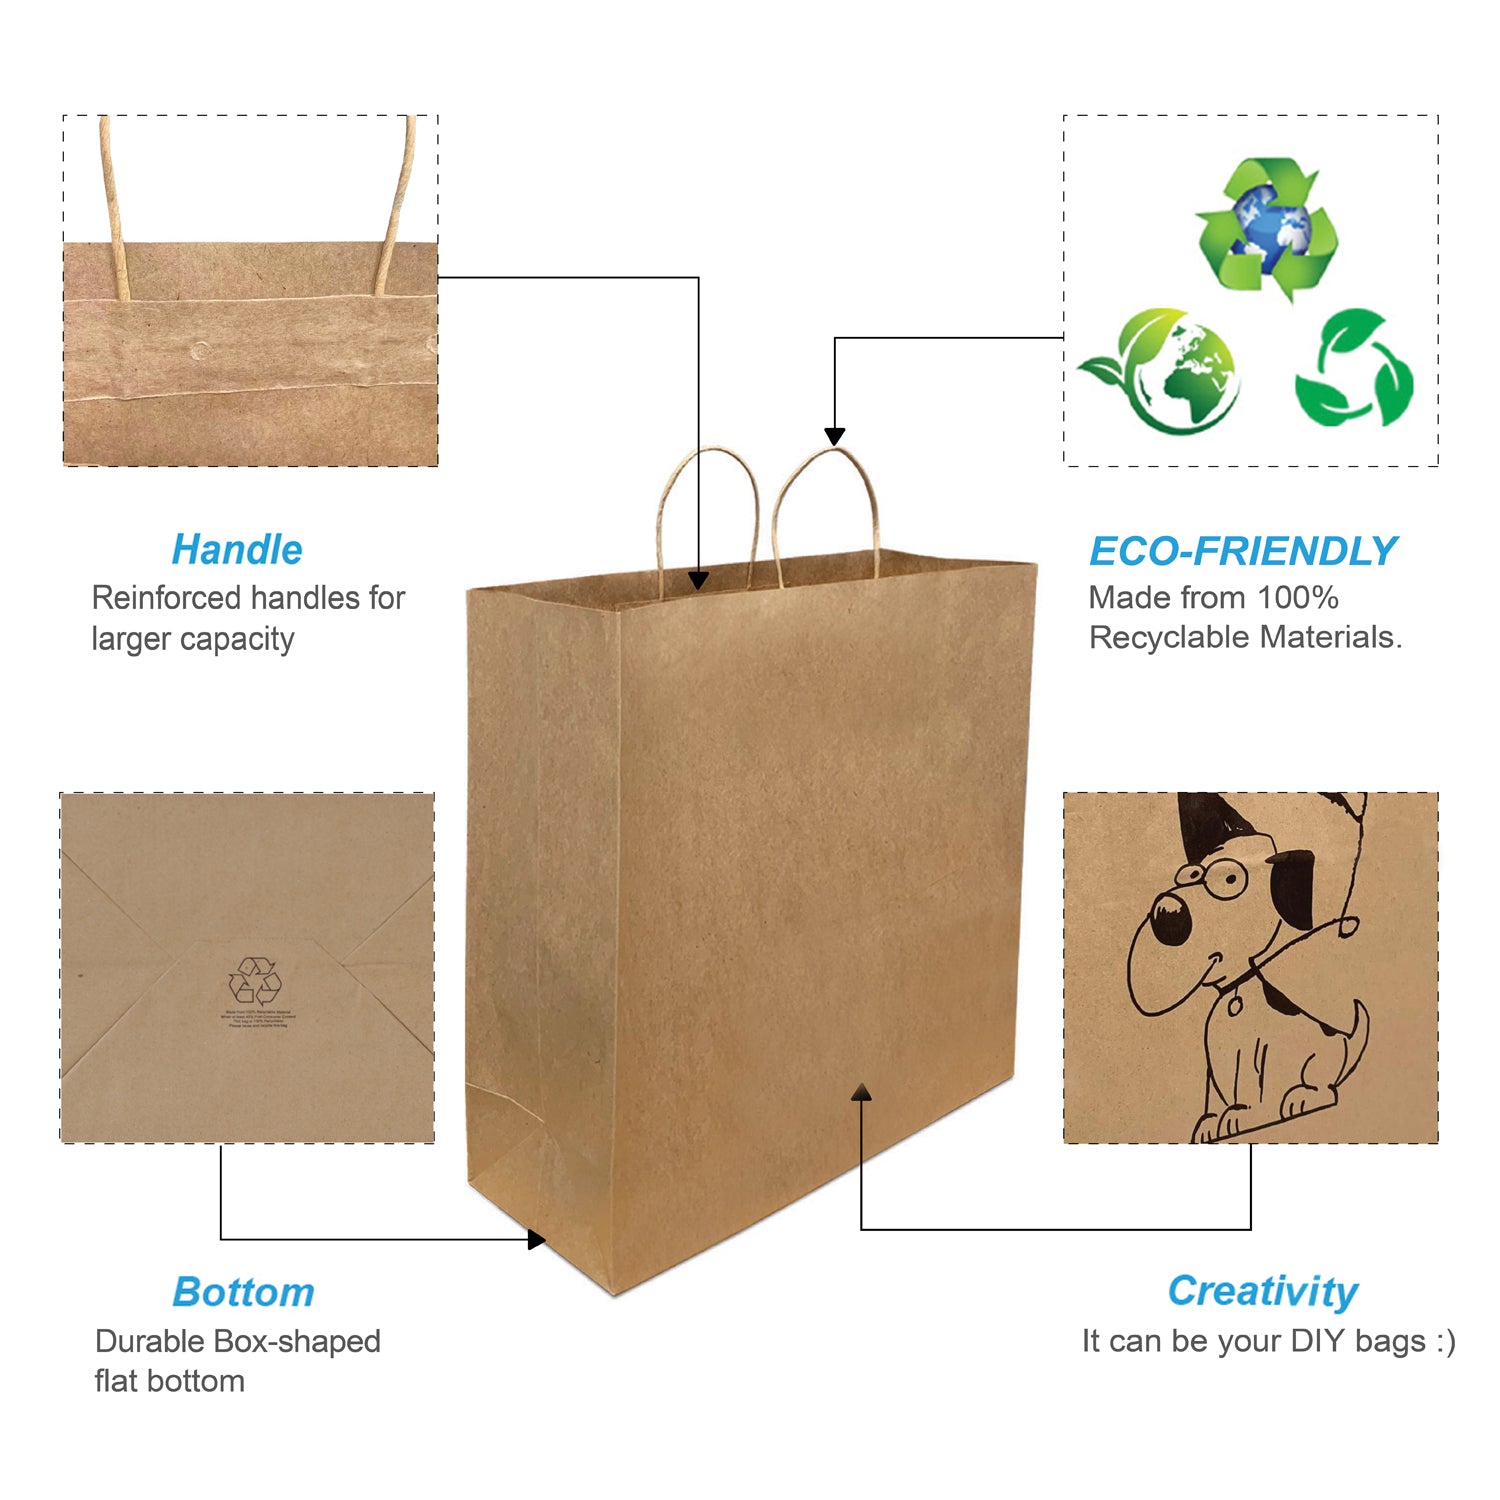 200 Pcs, Jumbo, 18x7x18.75 inches, Kraft Paper Bags, with Twisted Handle